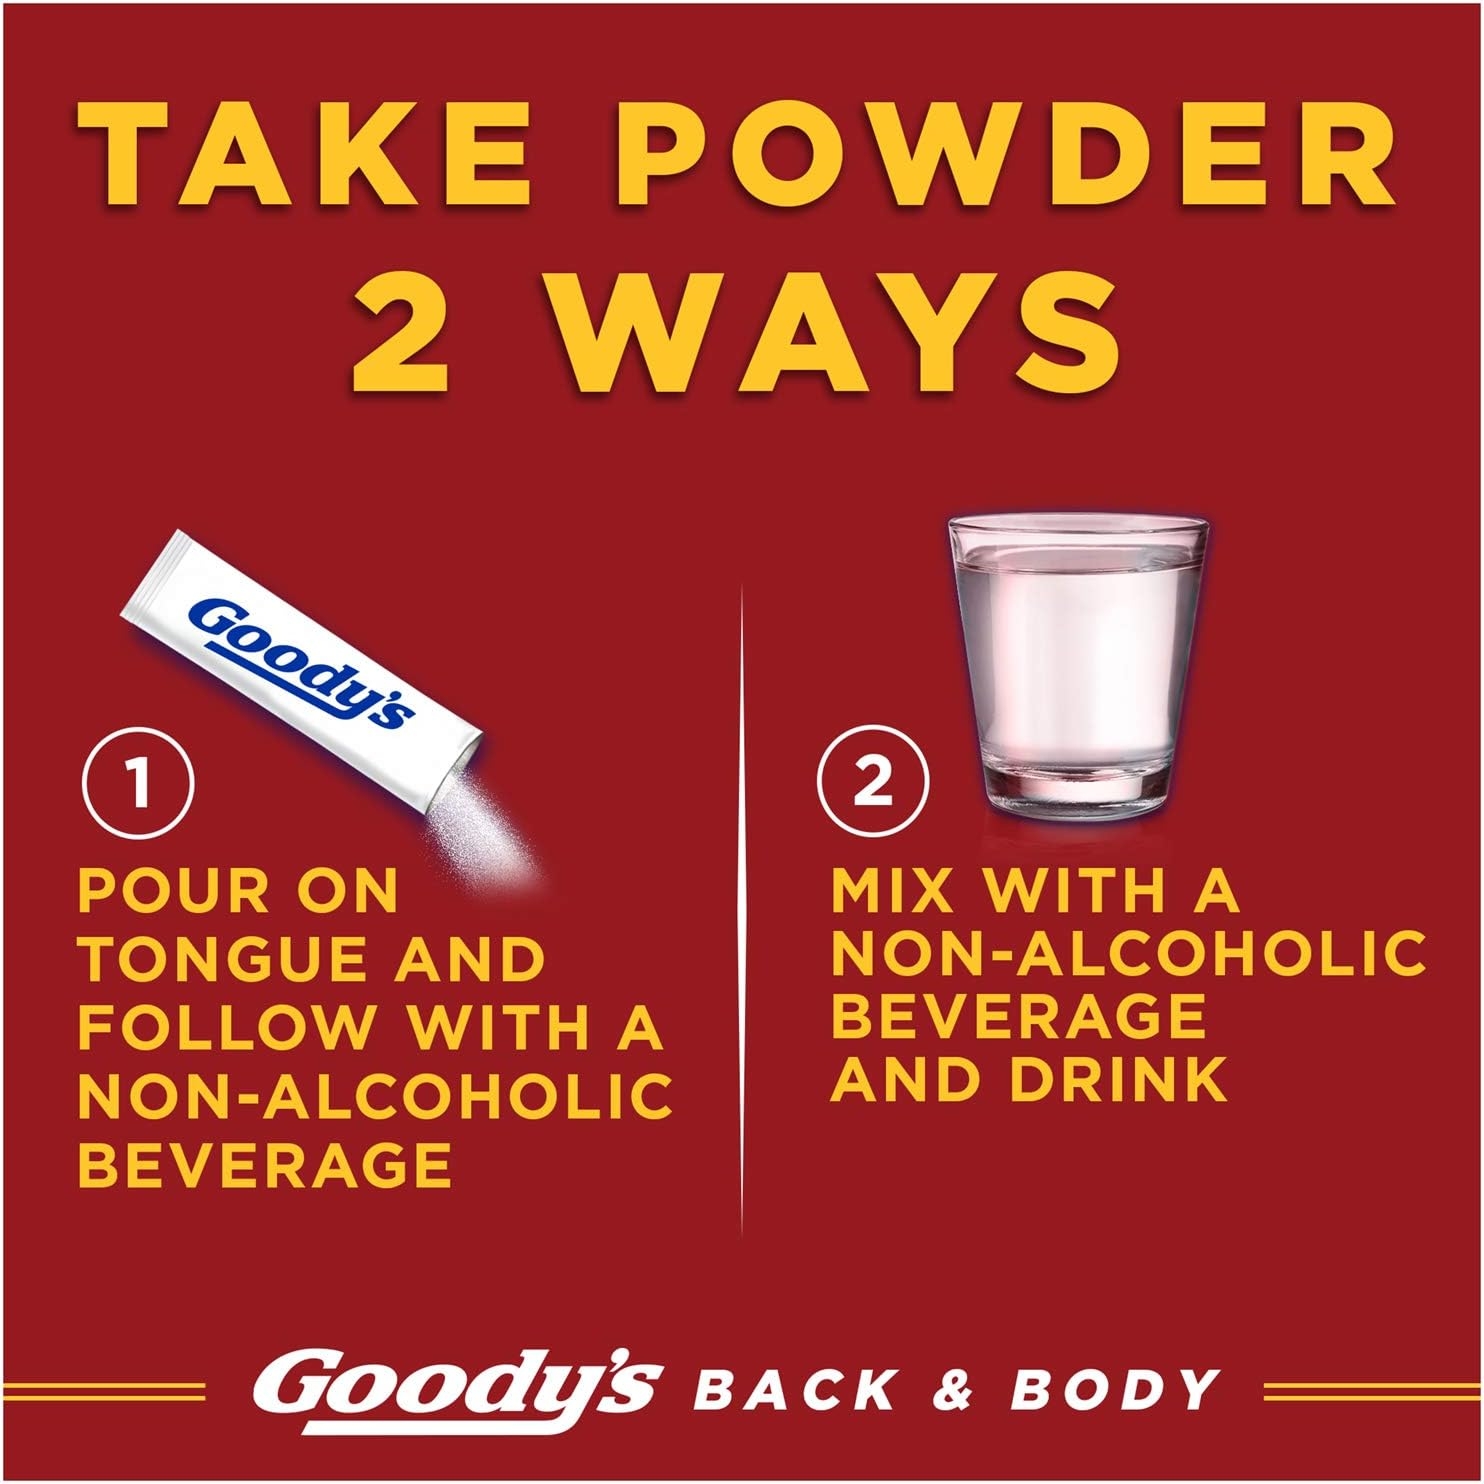 Goody's Back and Body Pain Relief Powder, 6 Powder Sticks, 12 Pack